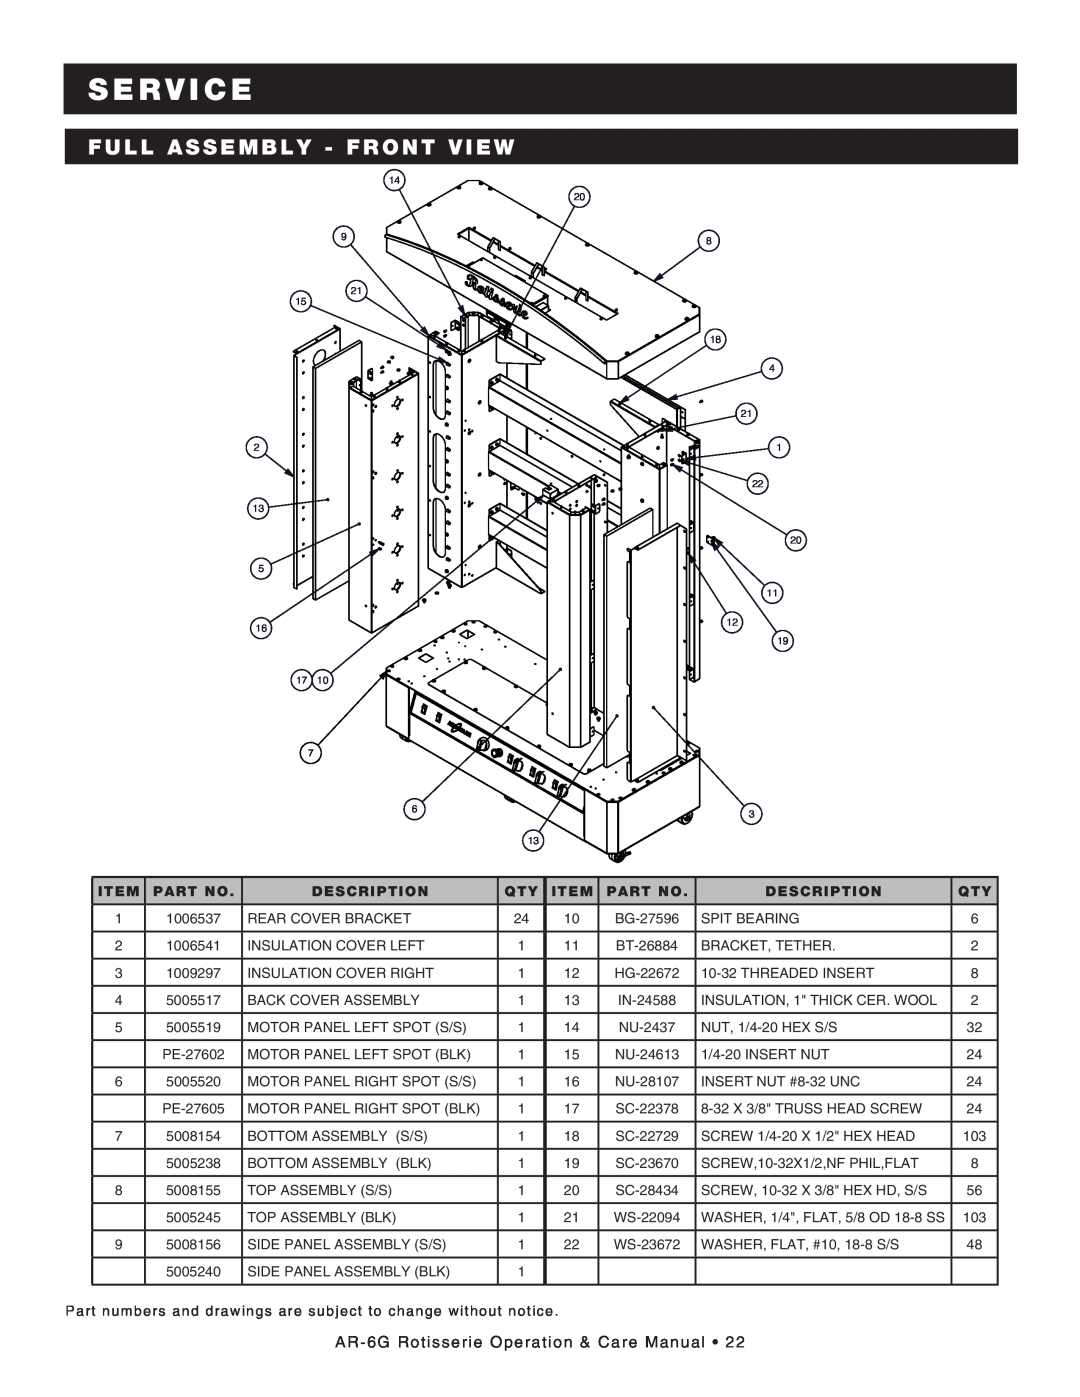 Alto-Shaam manual full assembly - Front view, s e rv ic e, AR-6GRotisserie Operation & Care Manual •, Item, PART No 